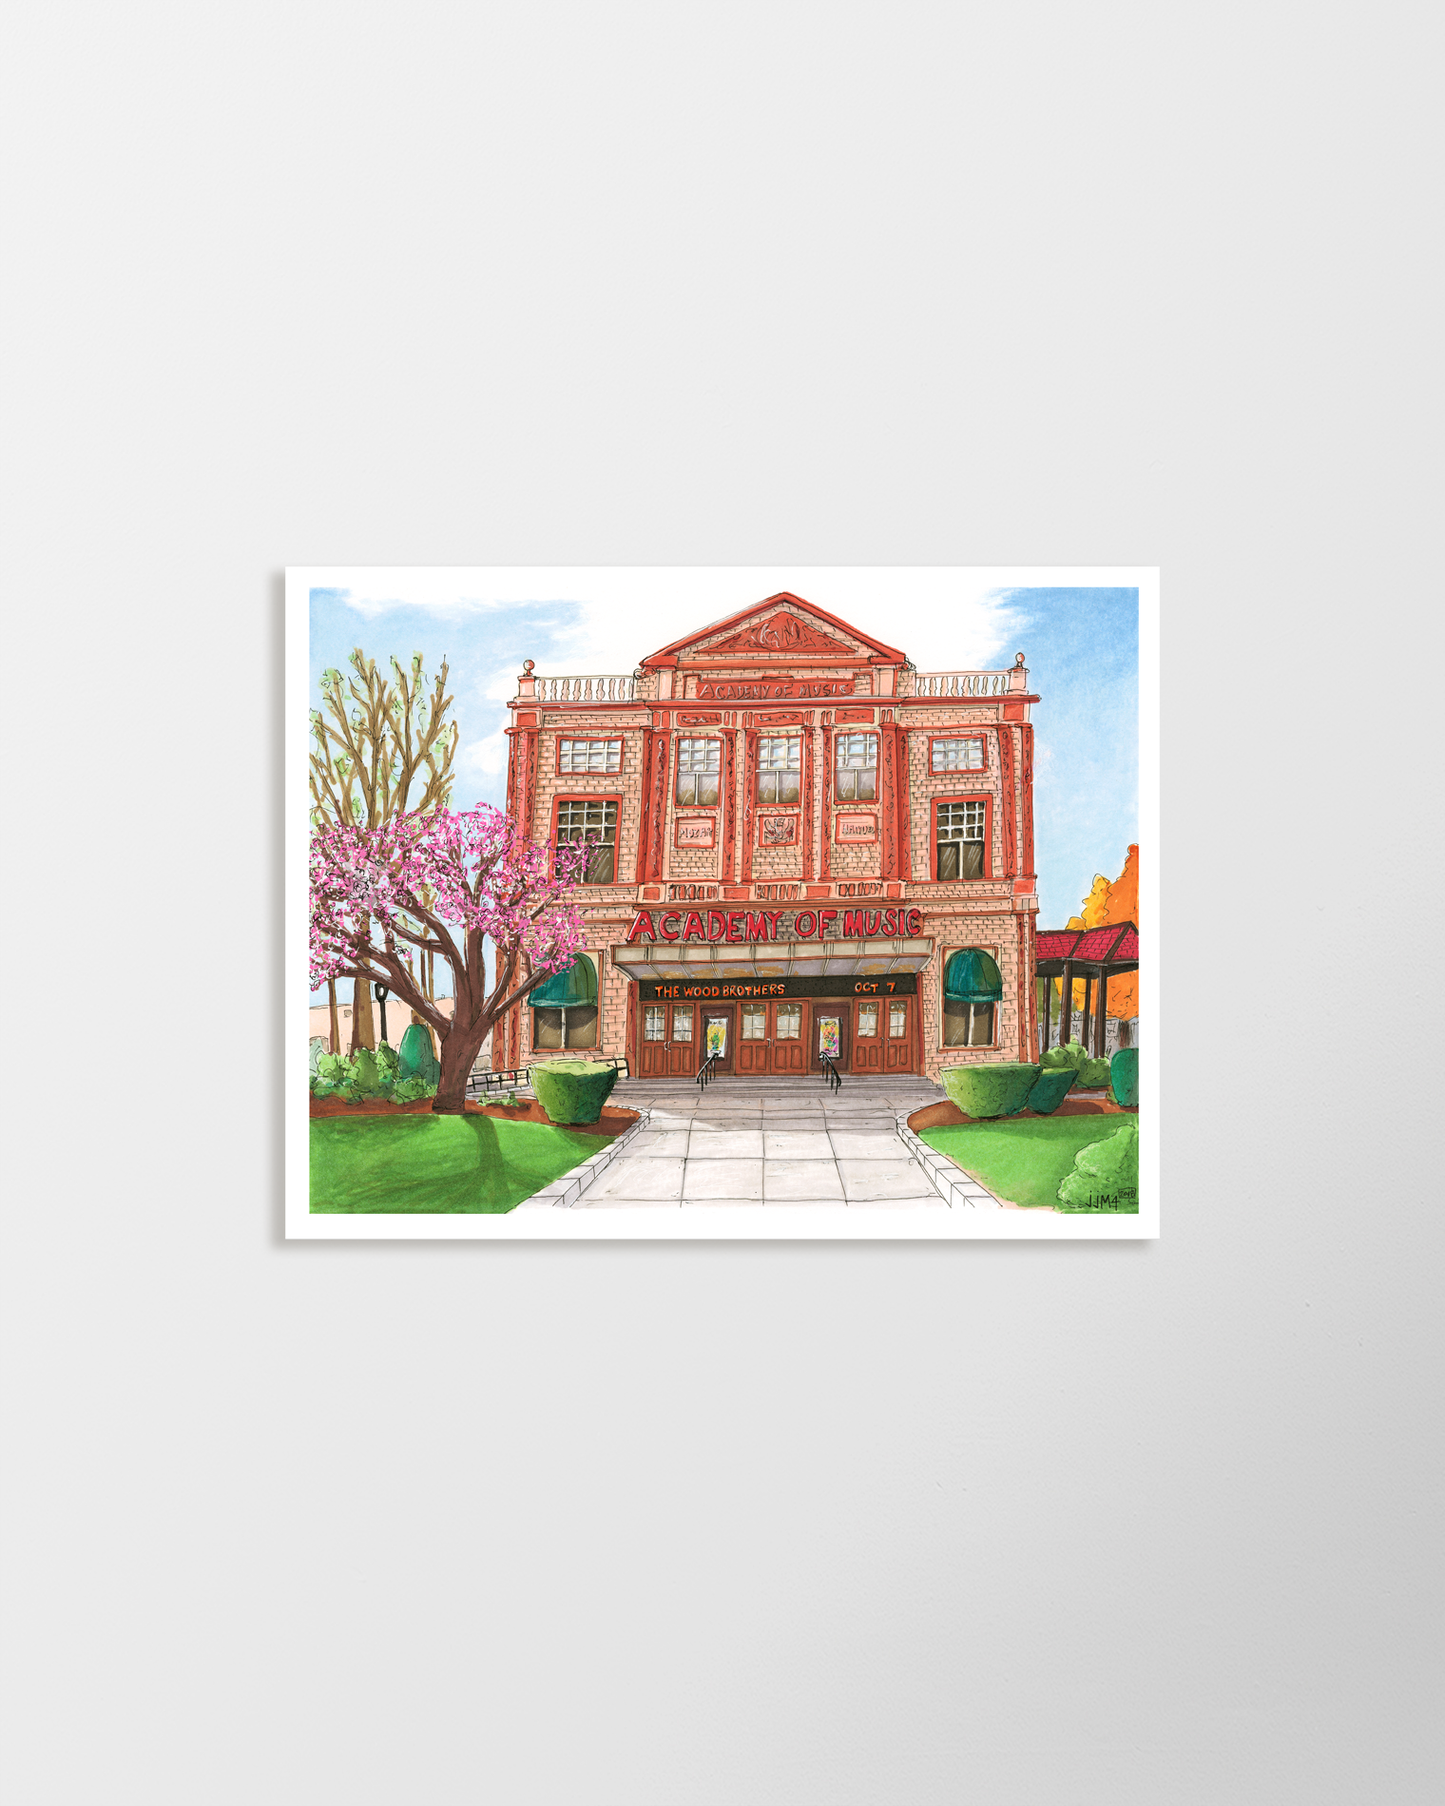 Academy of Music - print by Jesse Morgan